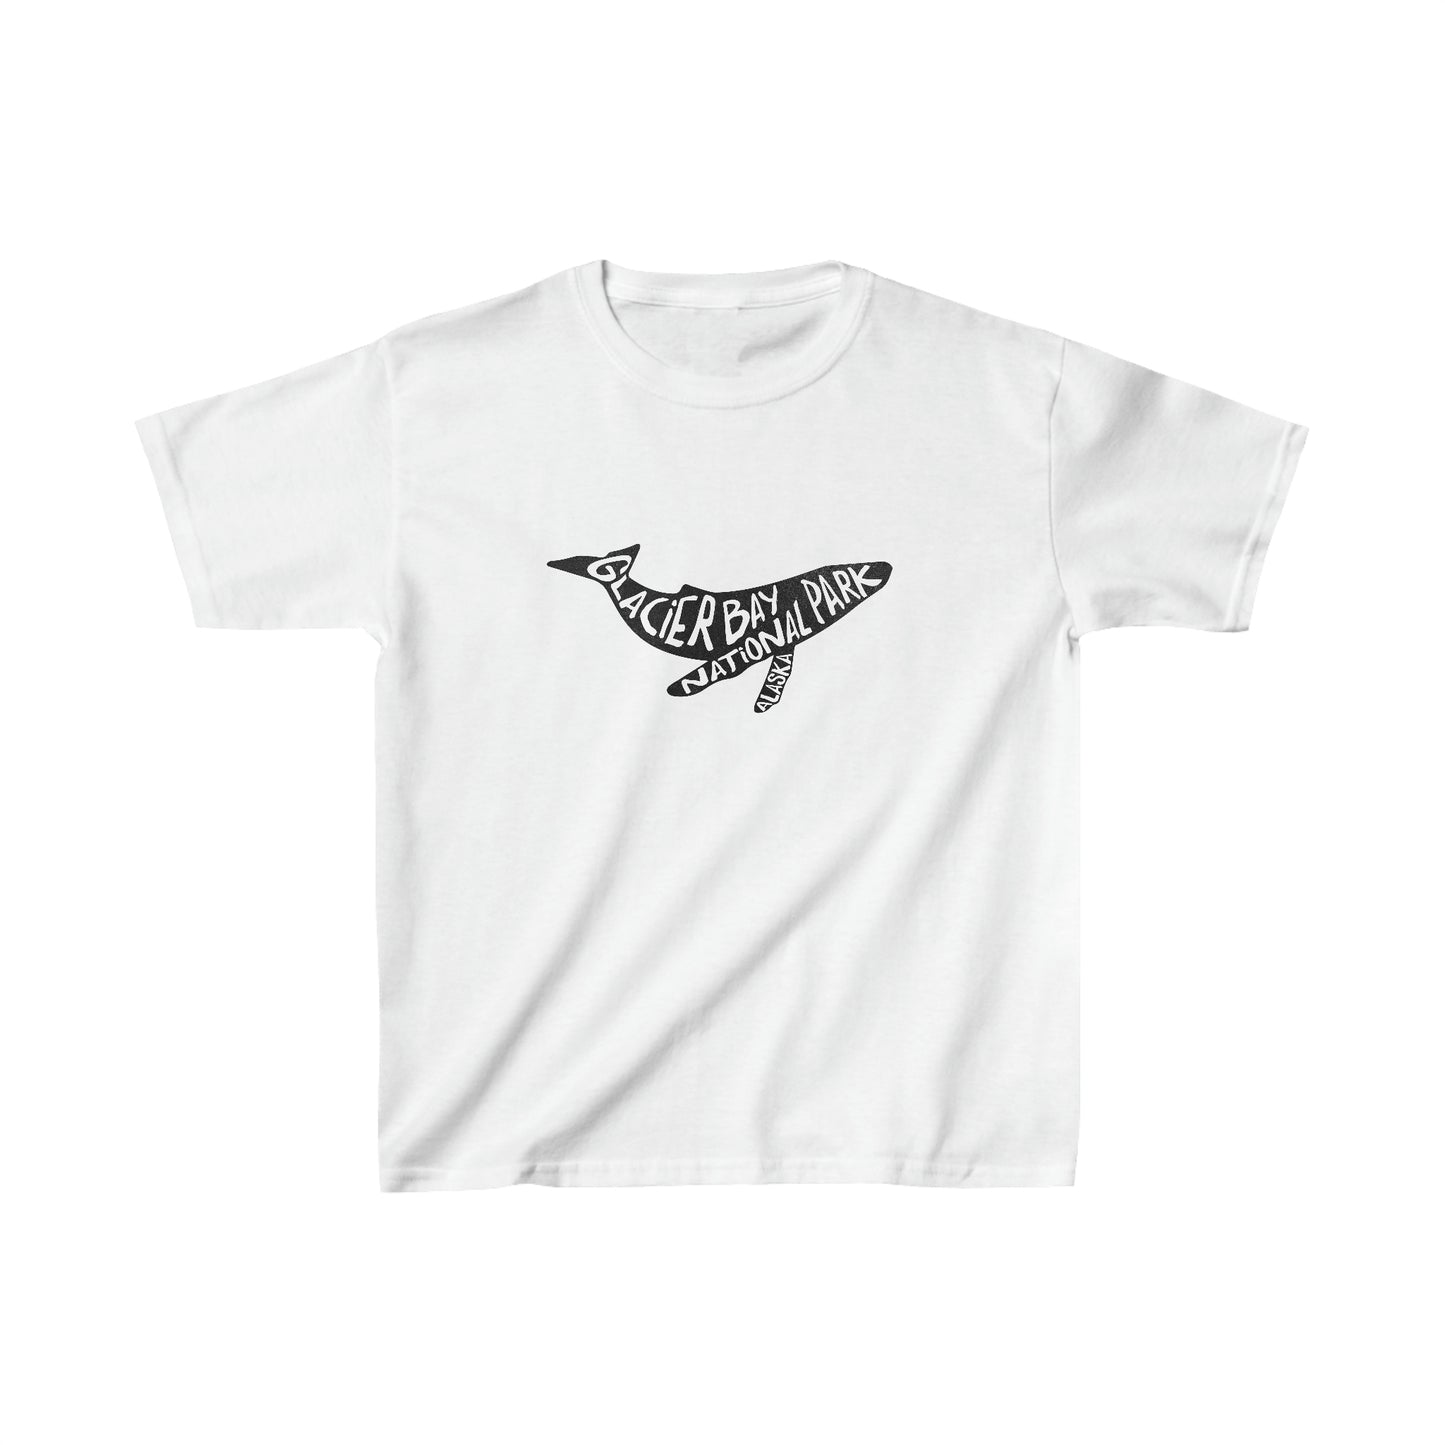 Glacier Bay National Park Child T-Shirt - Humpback Whale Chunky Text